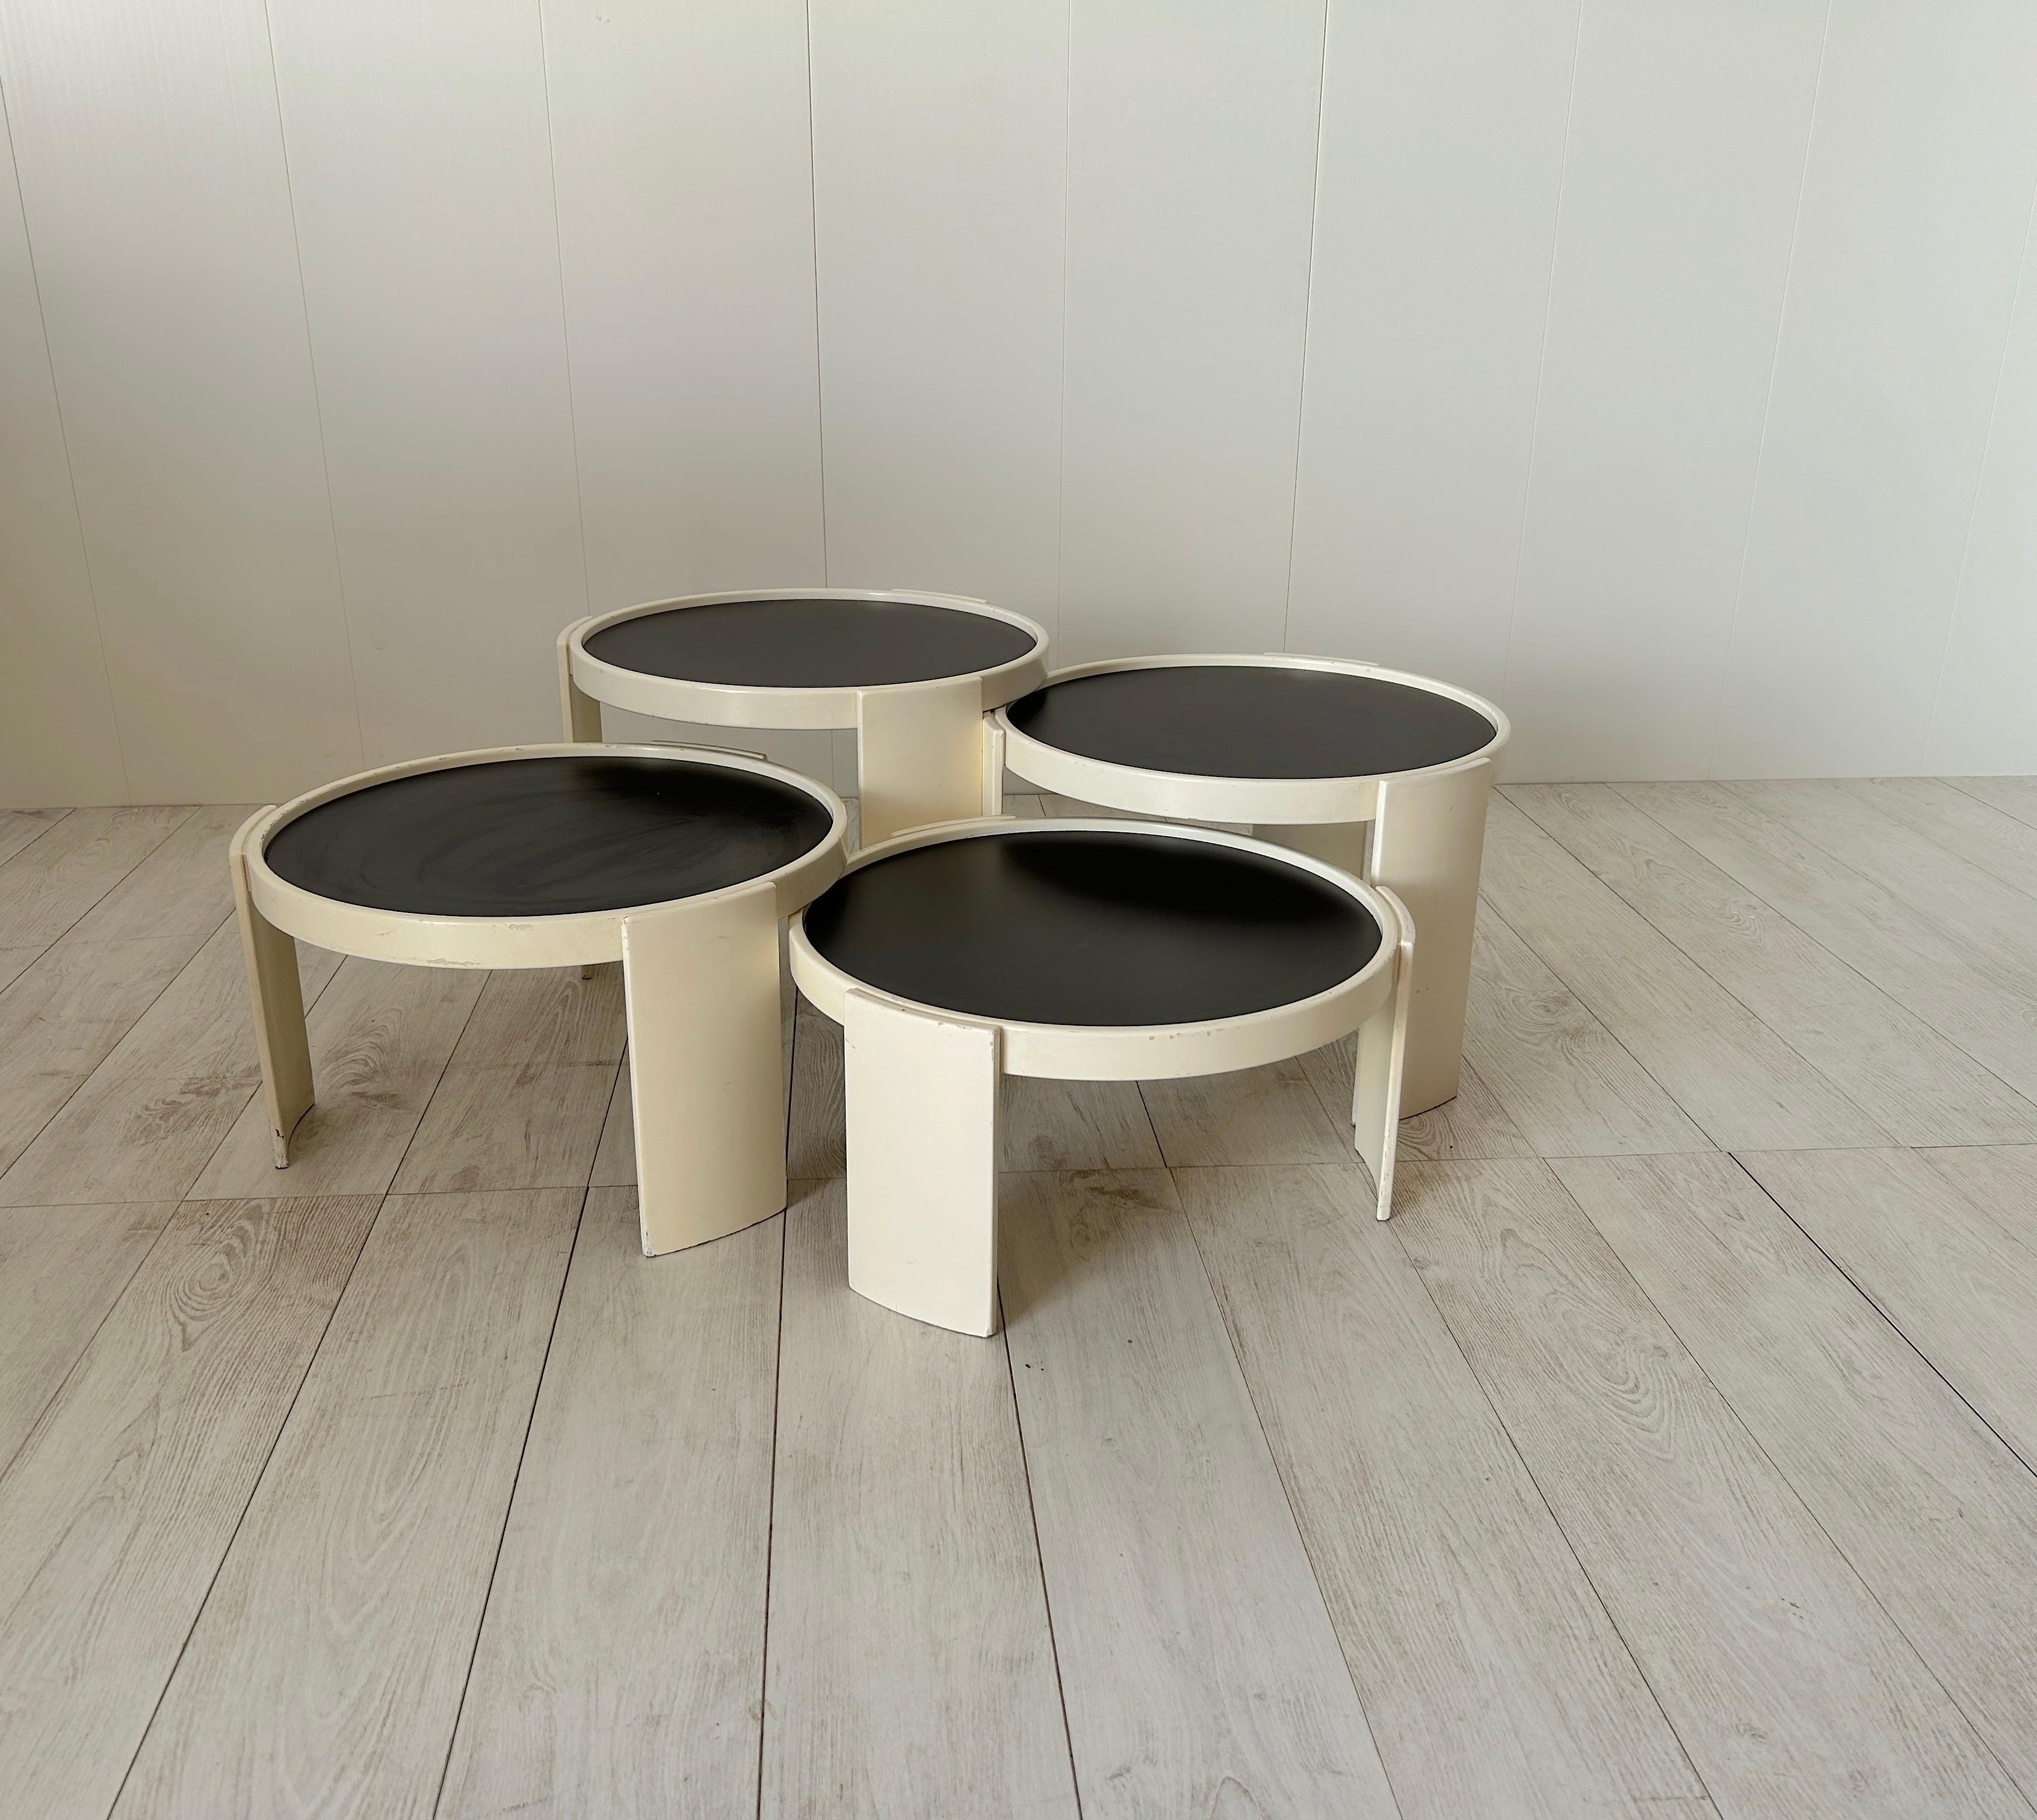 Very rare set of four low tables round-shaped, model 780/783 with a white lacquered wooden frame with a reversible top in black and white plastic laminate, designed by Gianfranco Frattini and manufactured by Cassina in 1960s. 

Original lacquered.